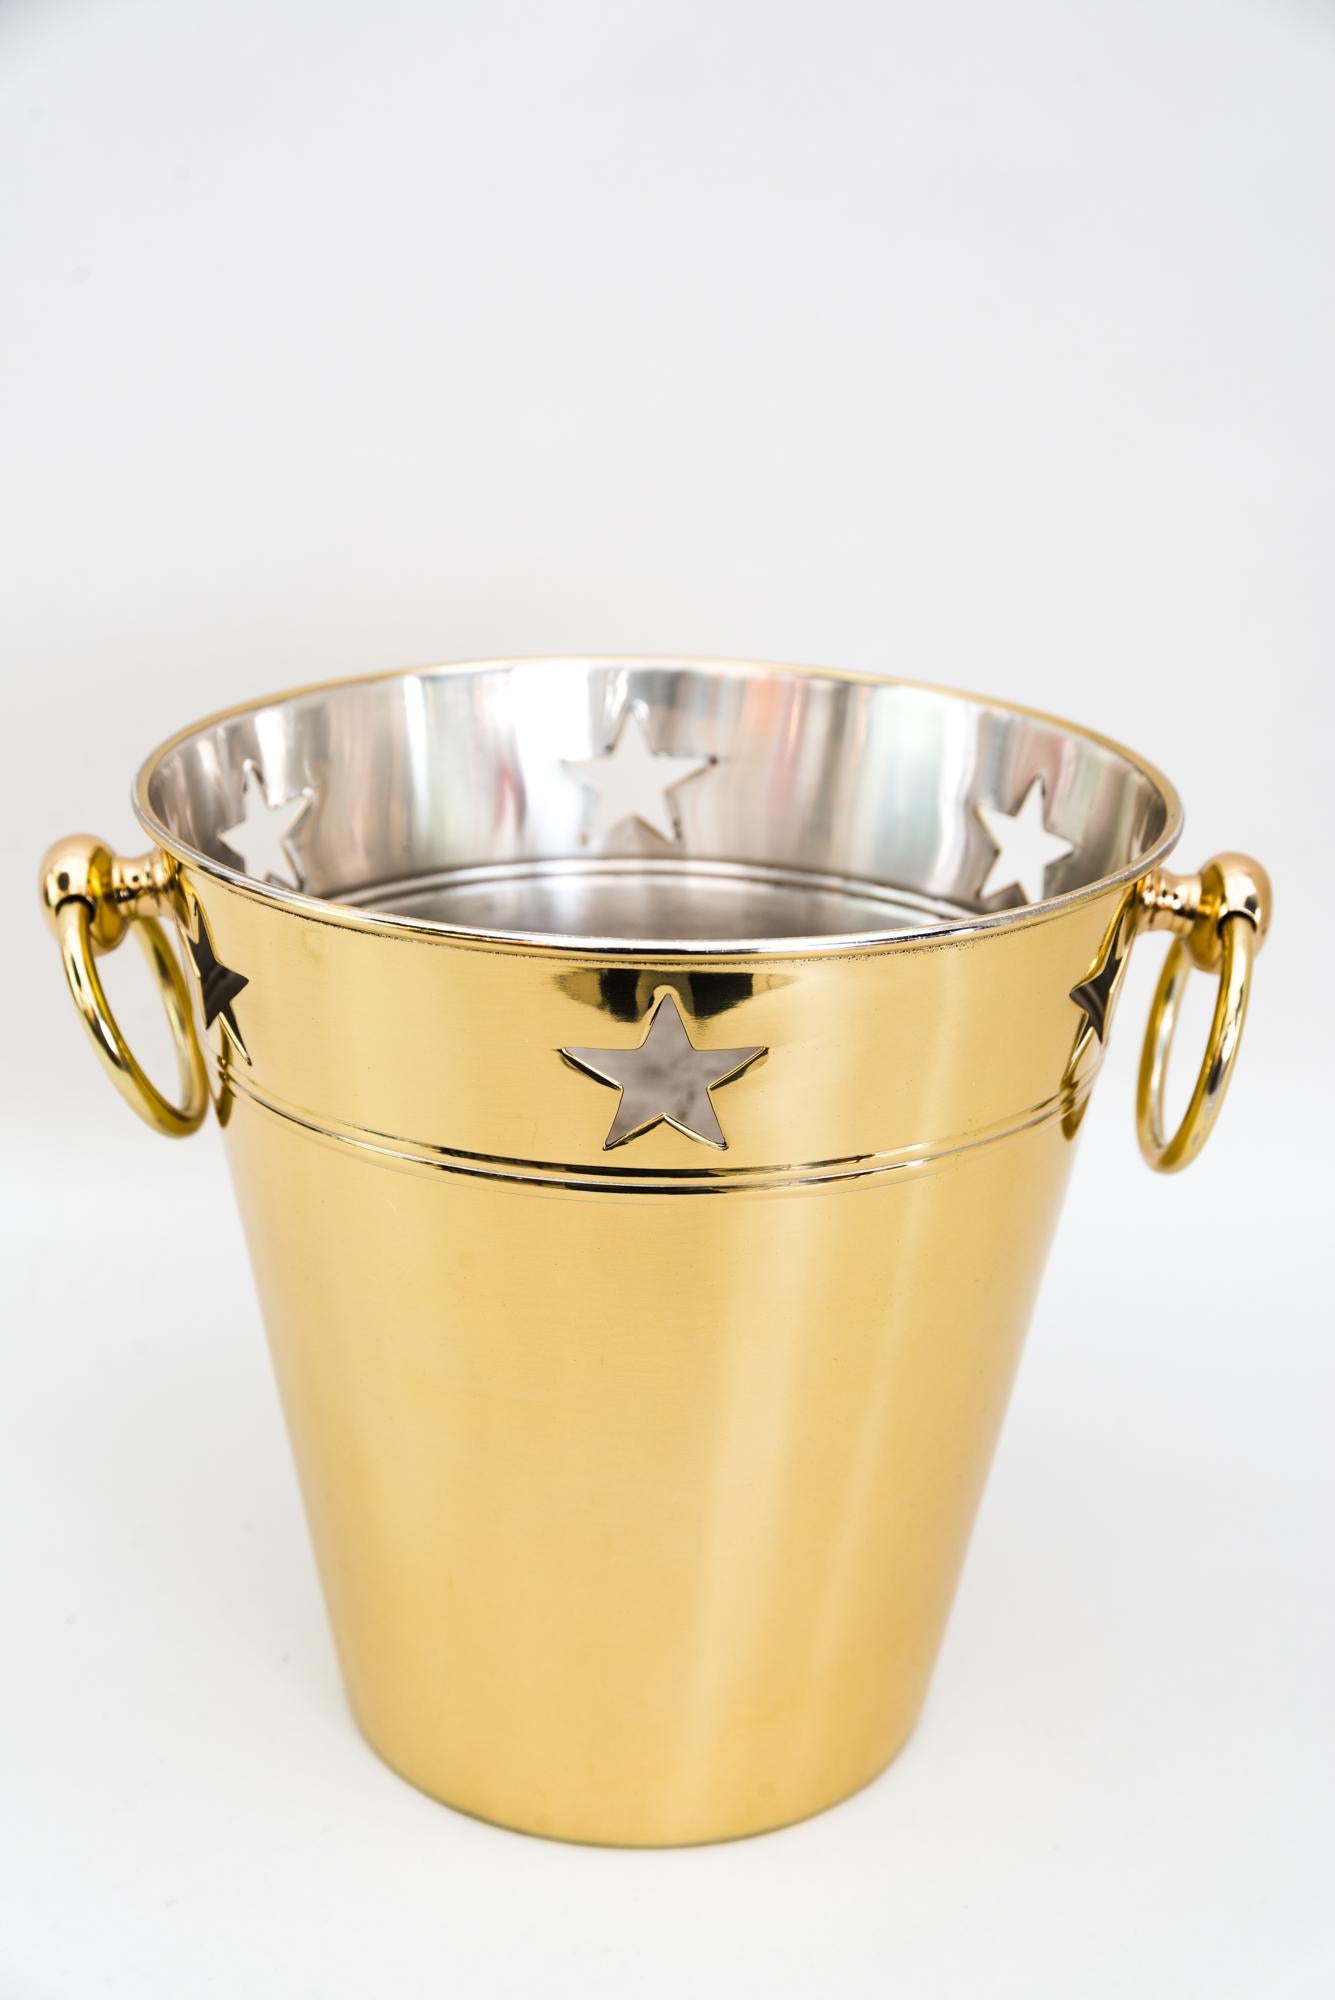 Champagne bucket vienna around 1920s
Polished and stove enameled.
 